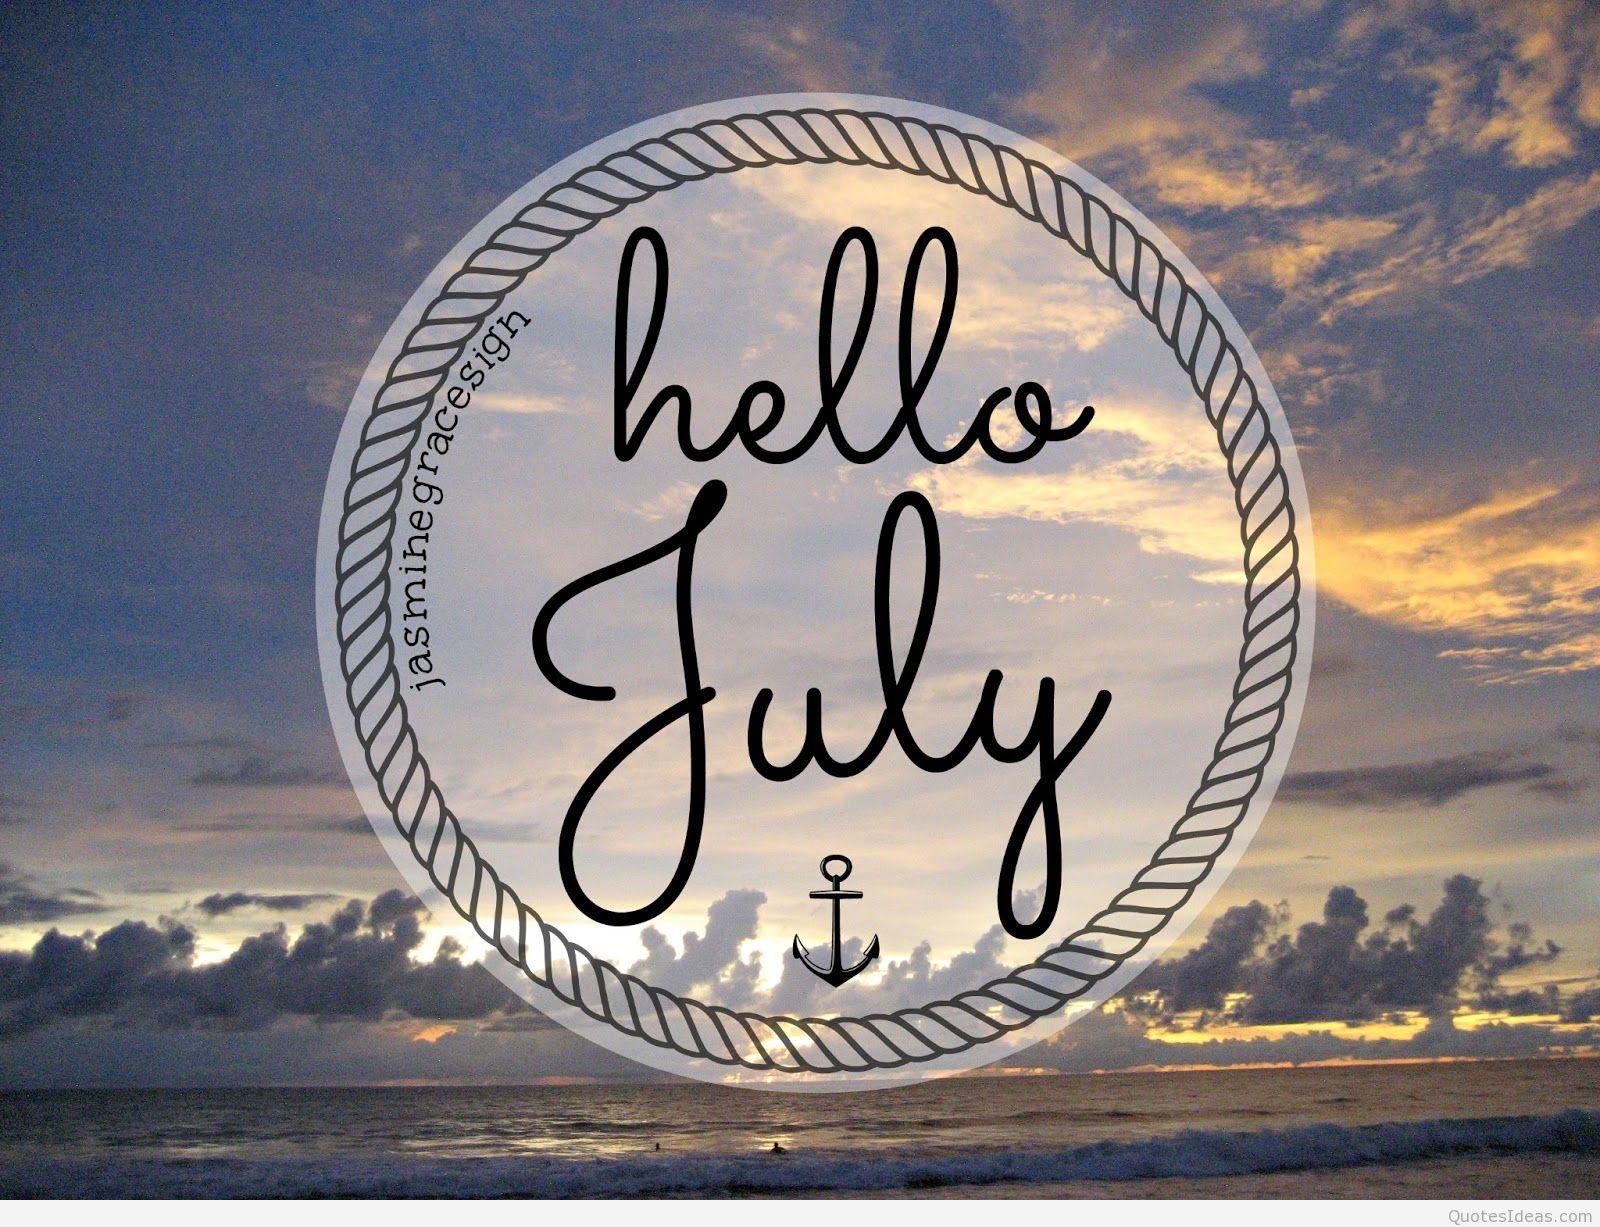 Awesome hello July photo, sayings, quotes wallpaper hd